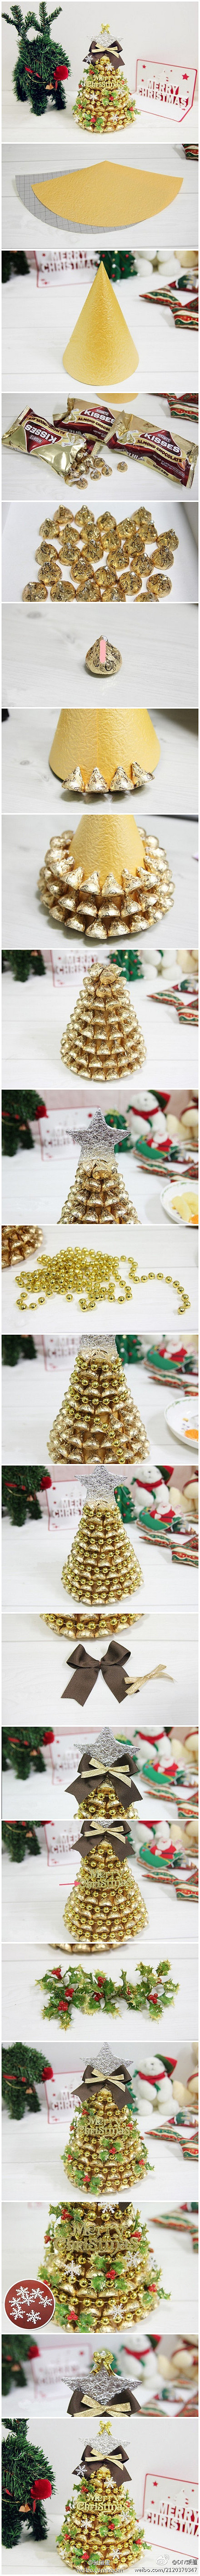 How-to-make-cute-Chocolate-Christmas-tree-decorations-step-by-step-DIY-tutorial-instructions